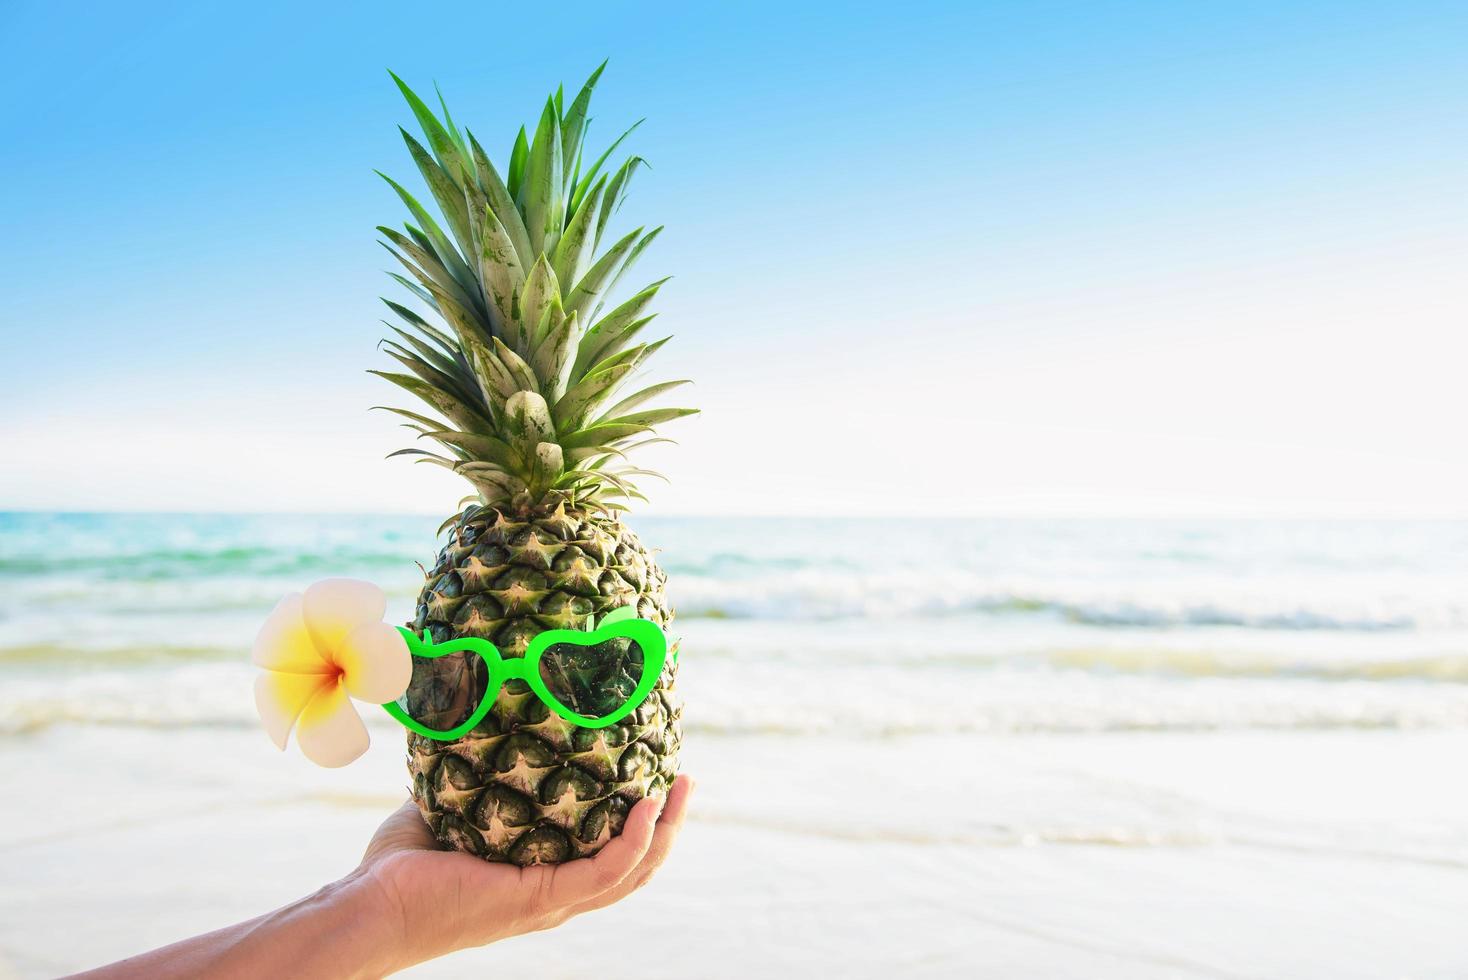 Lovely fresh pineapple putting glasses in tourist hands with sea wave background - happy fun with healthy vacation concept photo